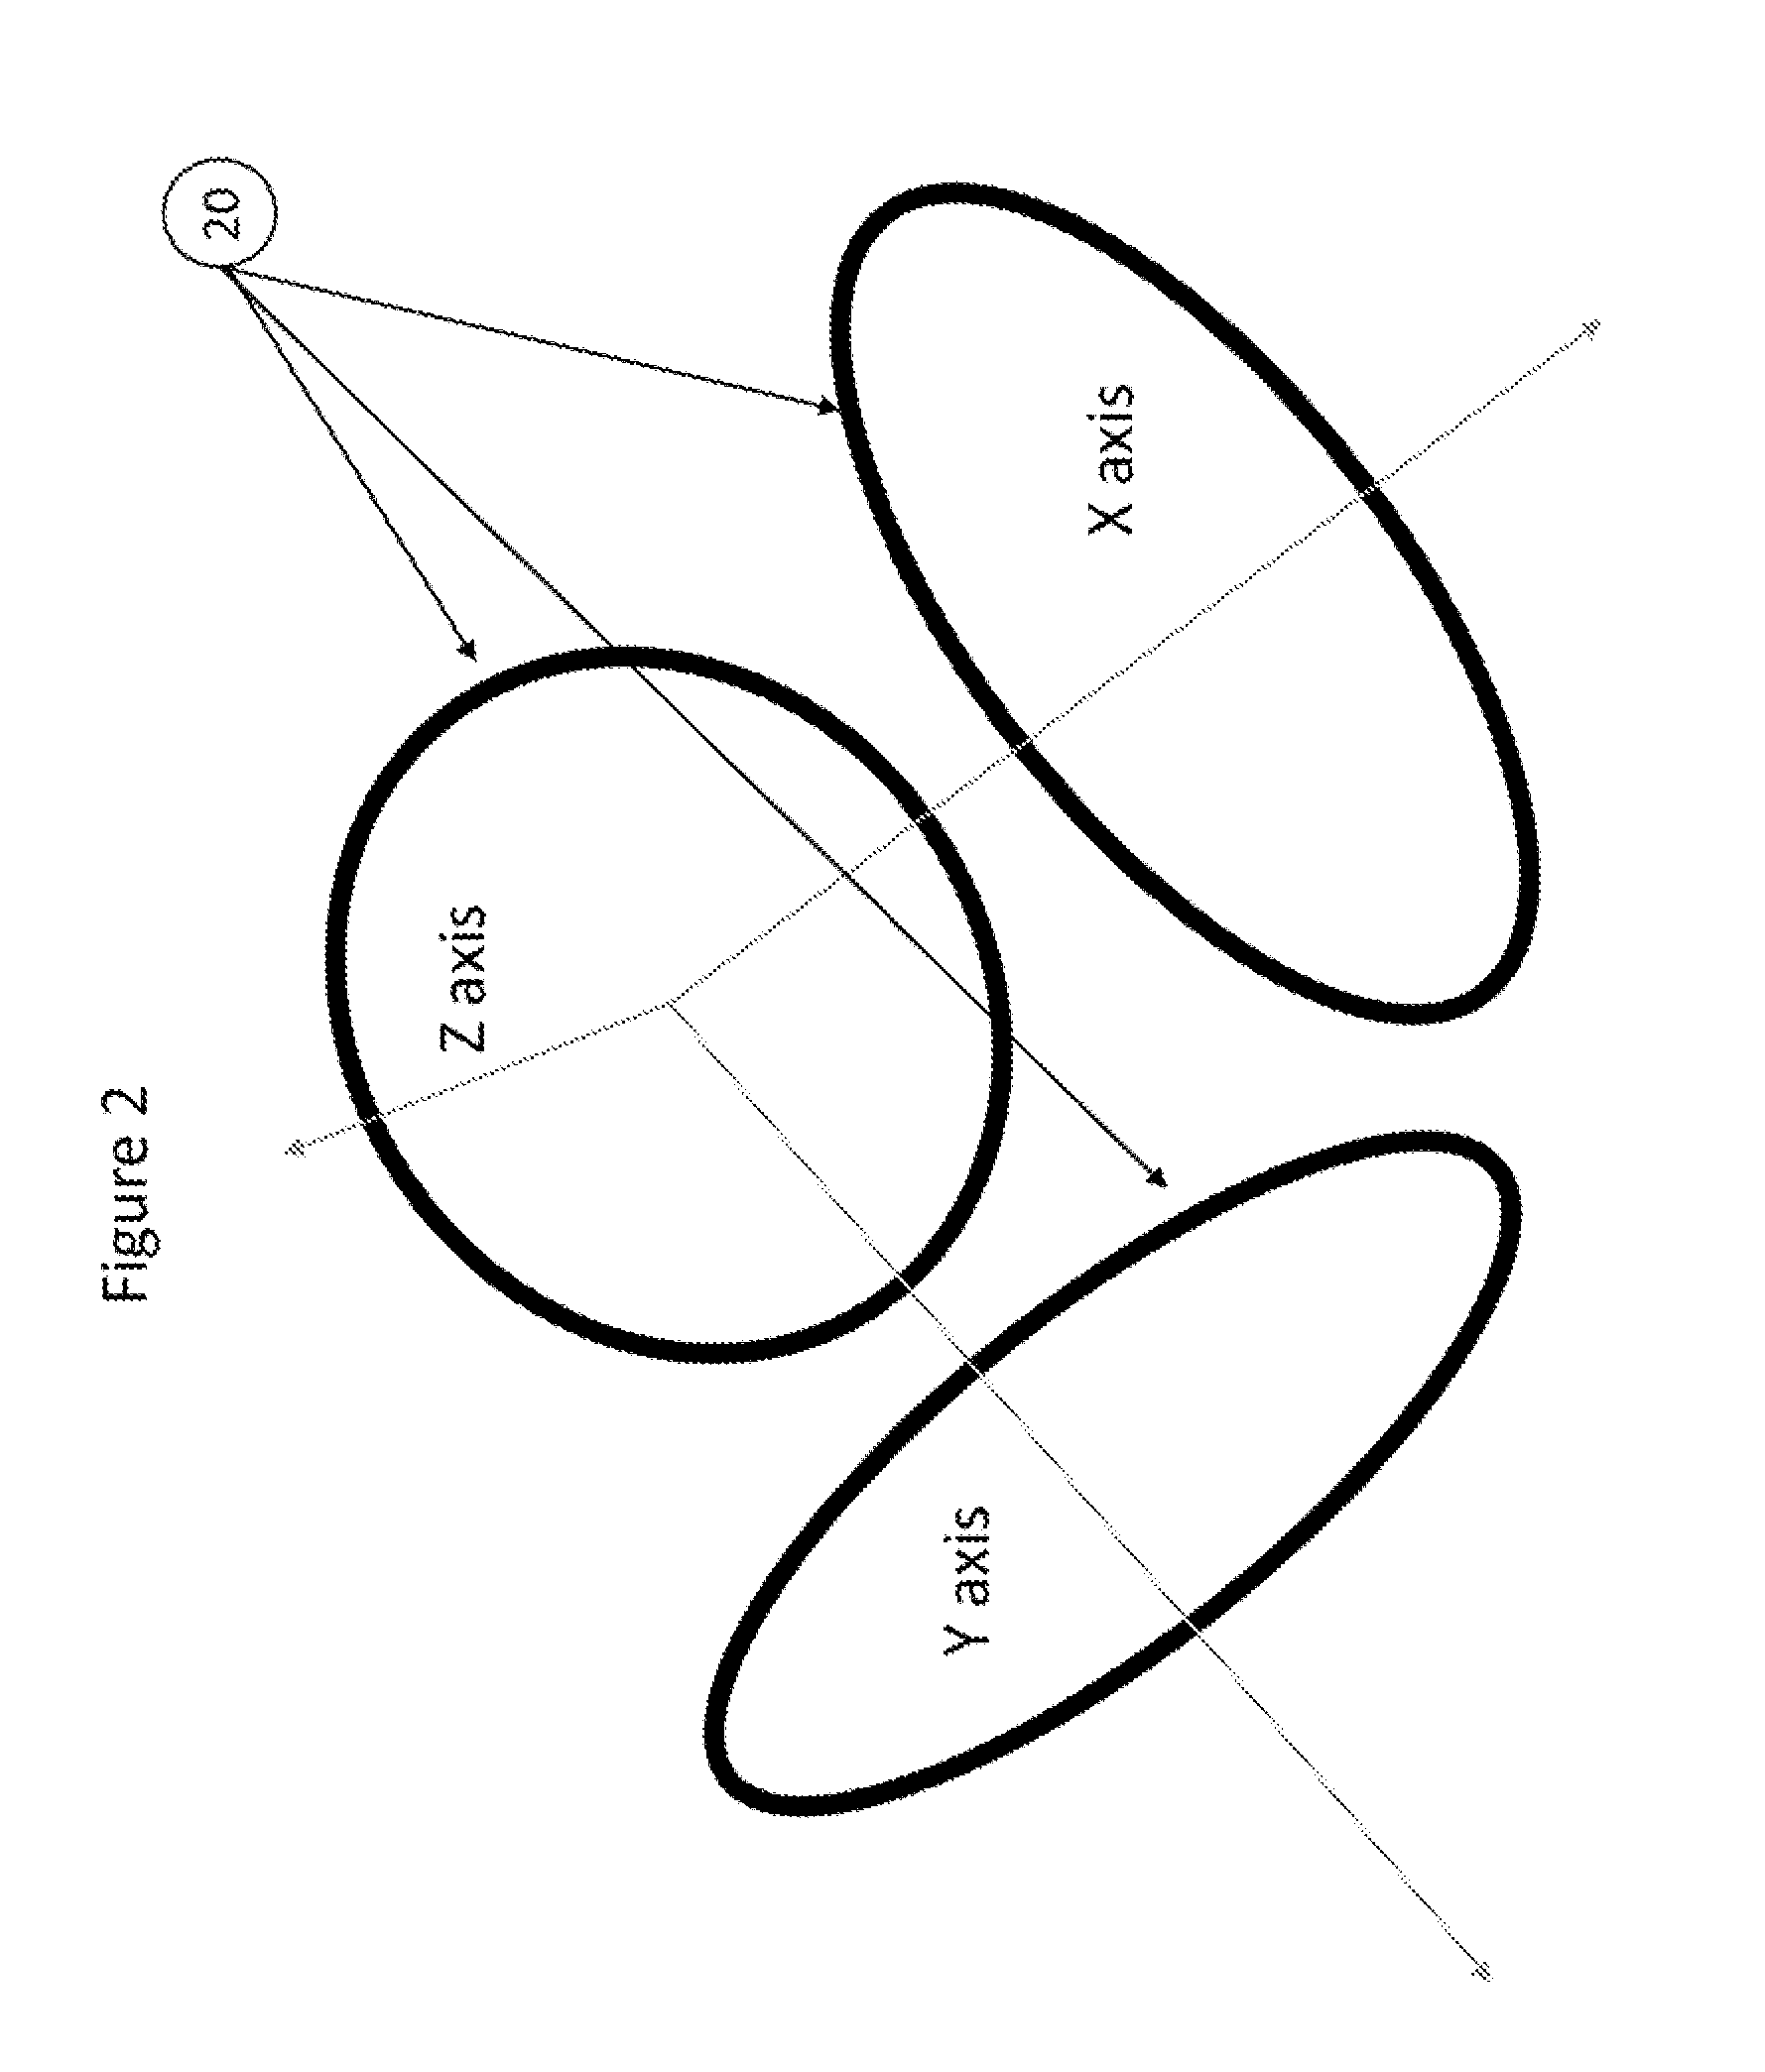 Selective access control apparatus for animals using electronic recognition